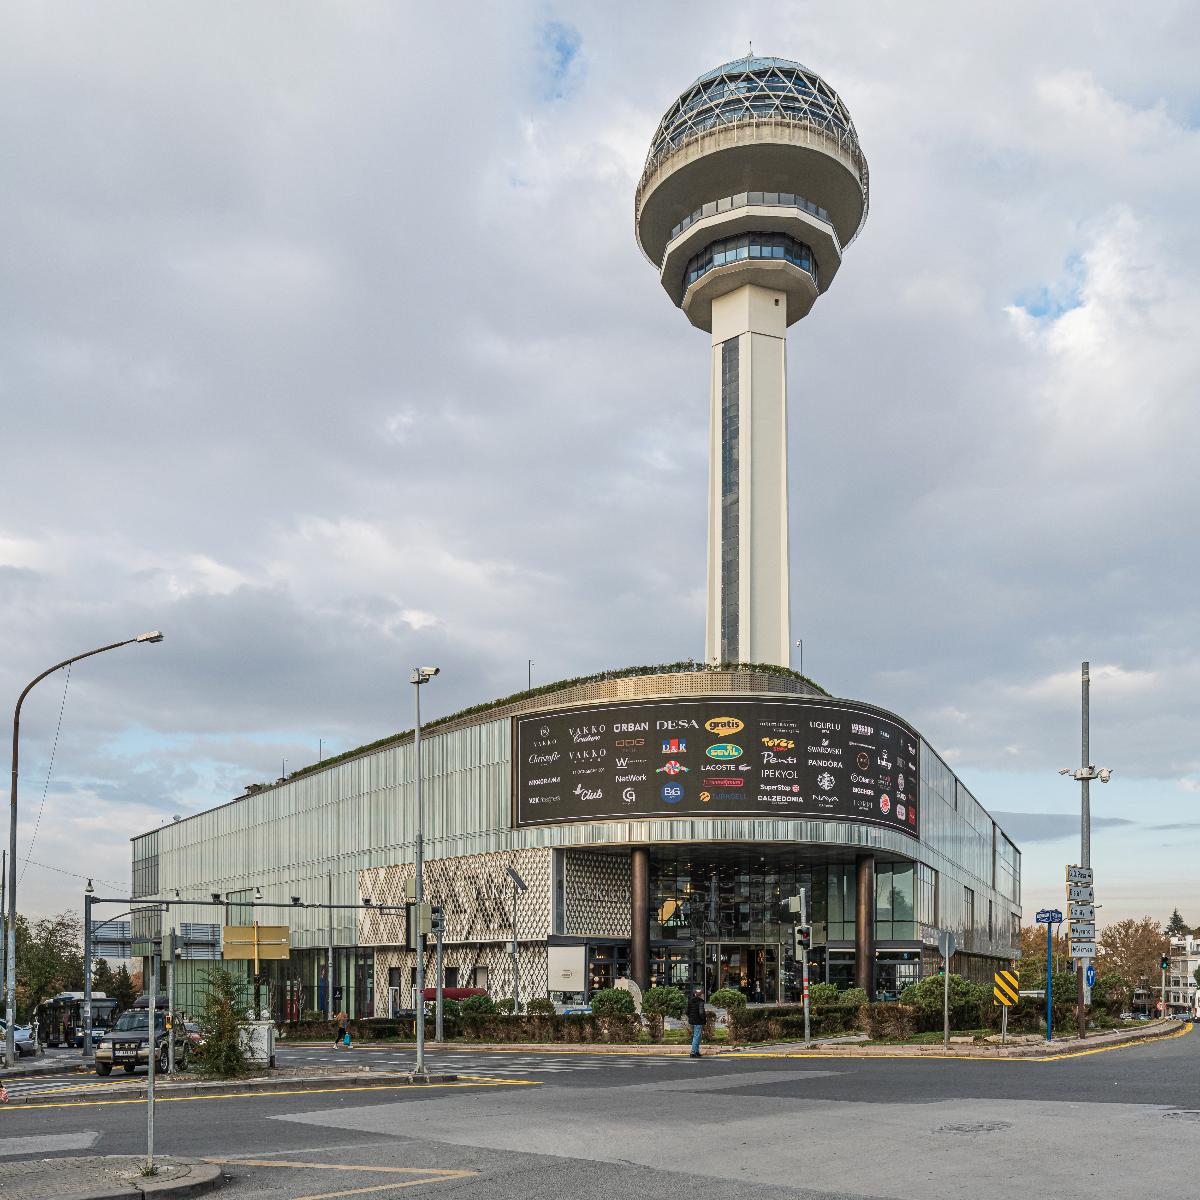 Atakule TV tower with attached shopping mall in Ankara, Turkey 